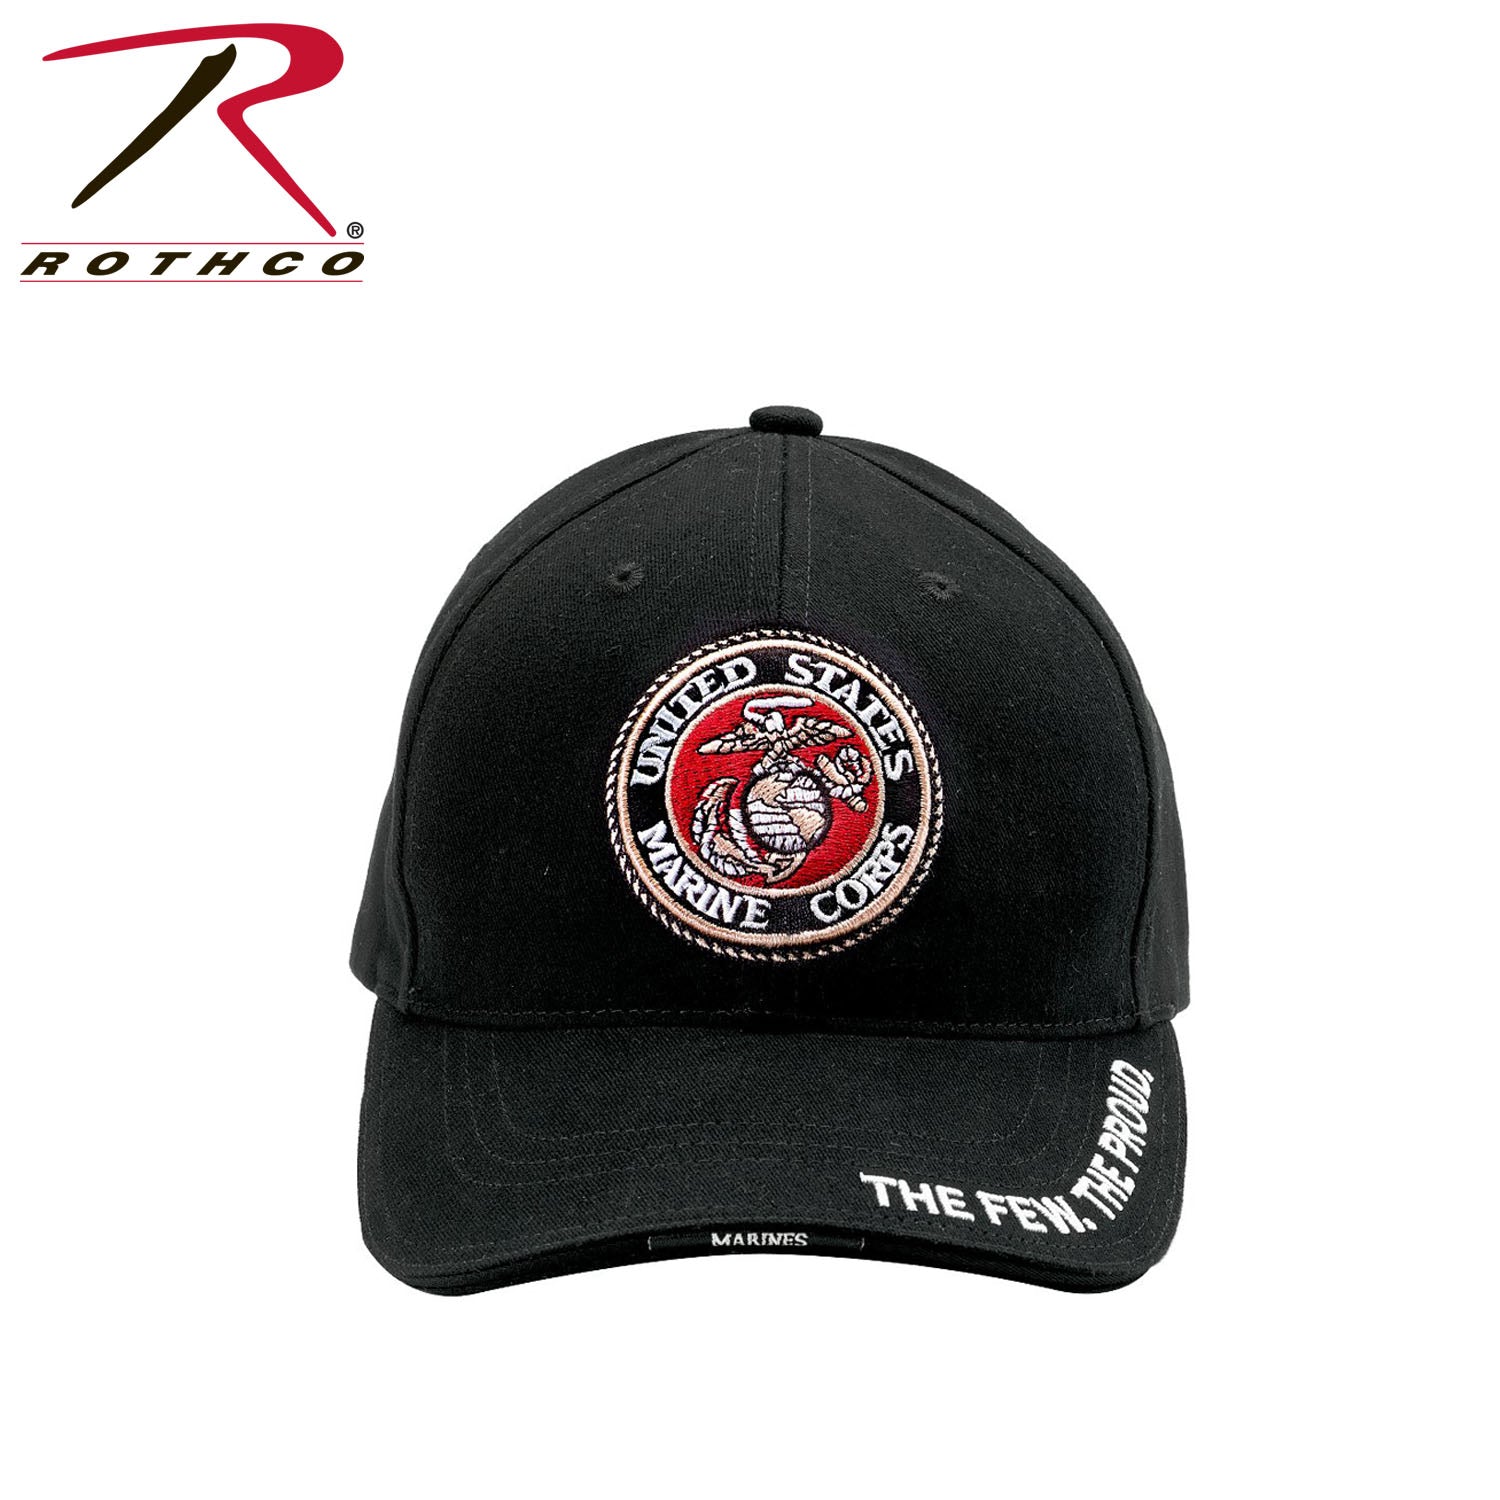 Rothco Deluxe Low Profile Cap With USMC Eagle, Globe & Anchor Logo